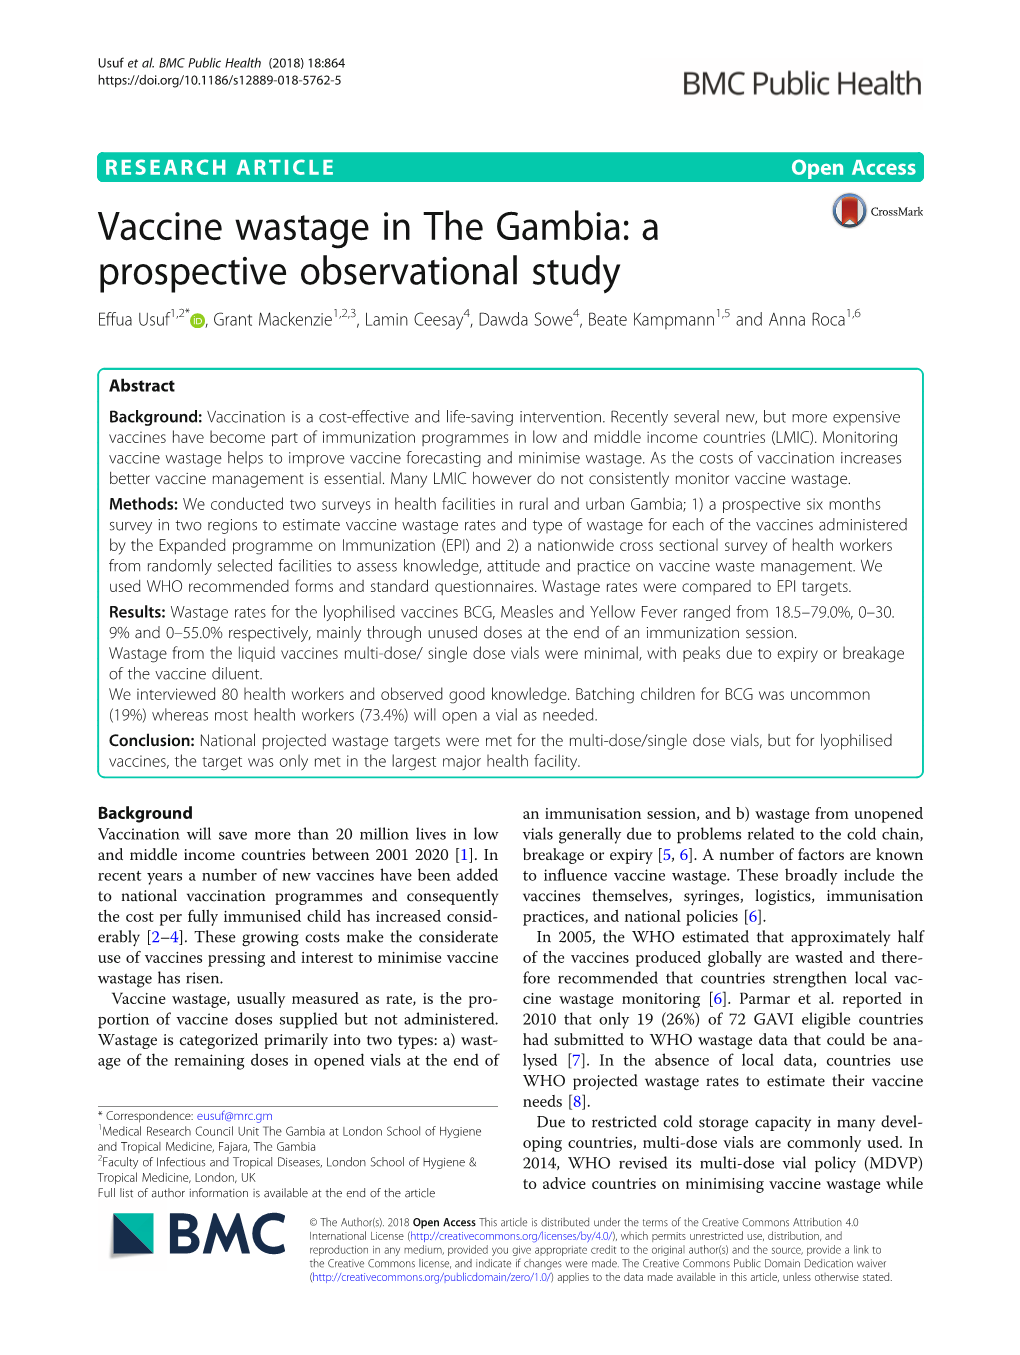 Vaccine Wastage in the Gambia: a Prospective Observational Study Effua Usuf1,2* , Grant Mackenzie1,2,3, Lamin Ceesay4, Dawda Sowe4, Beate Kampmann1,5 and Anna Roca1,6